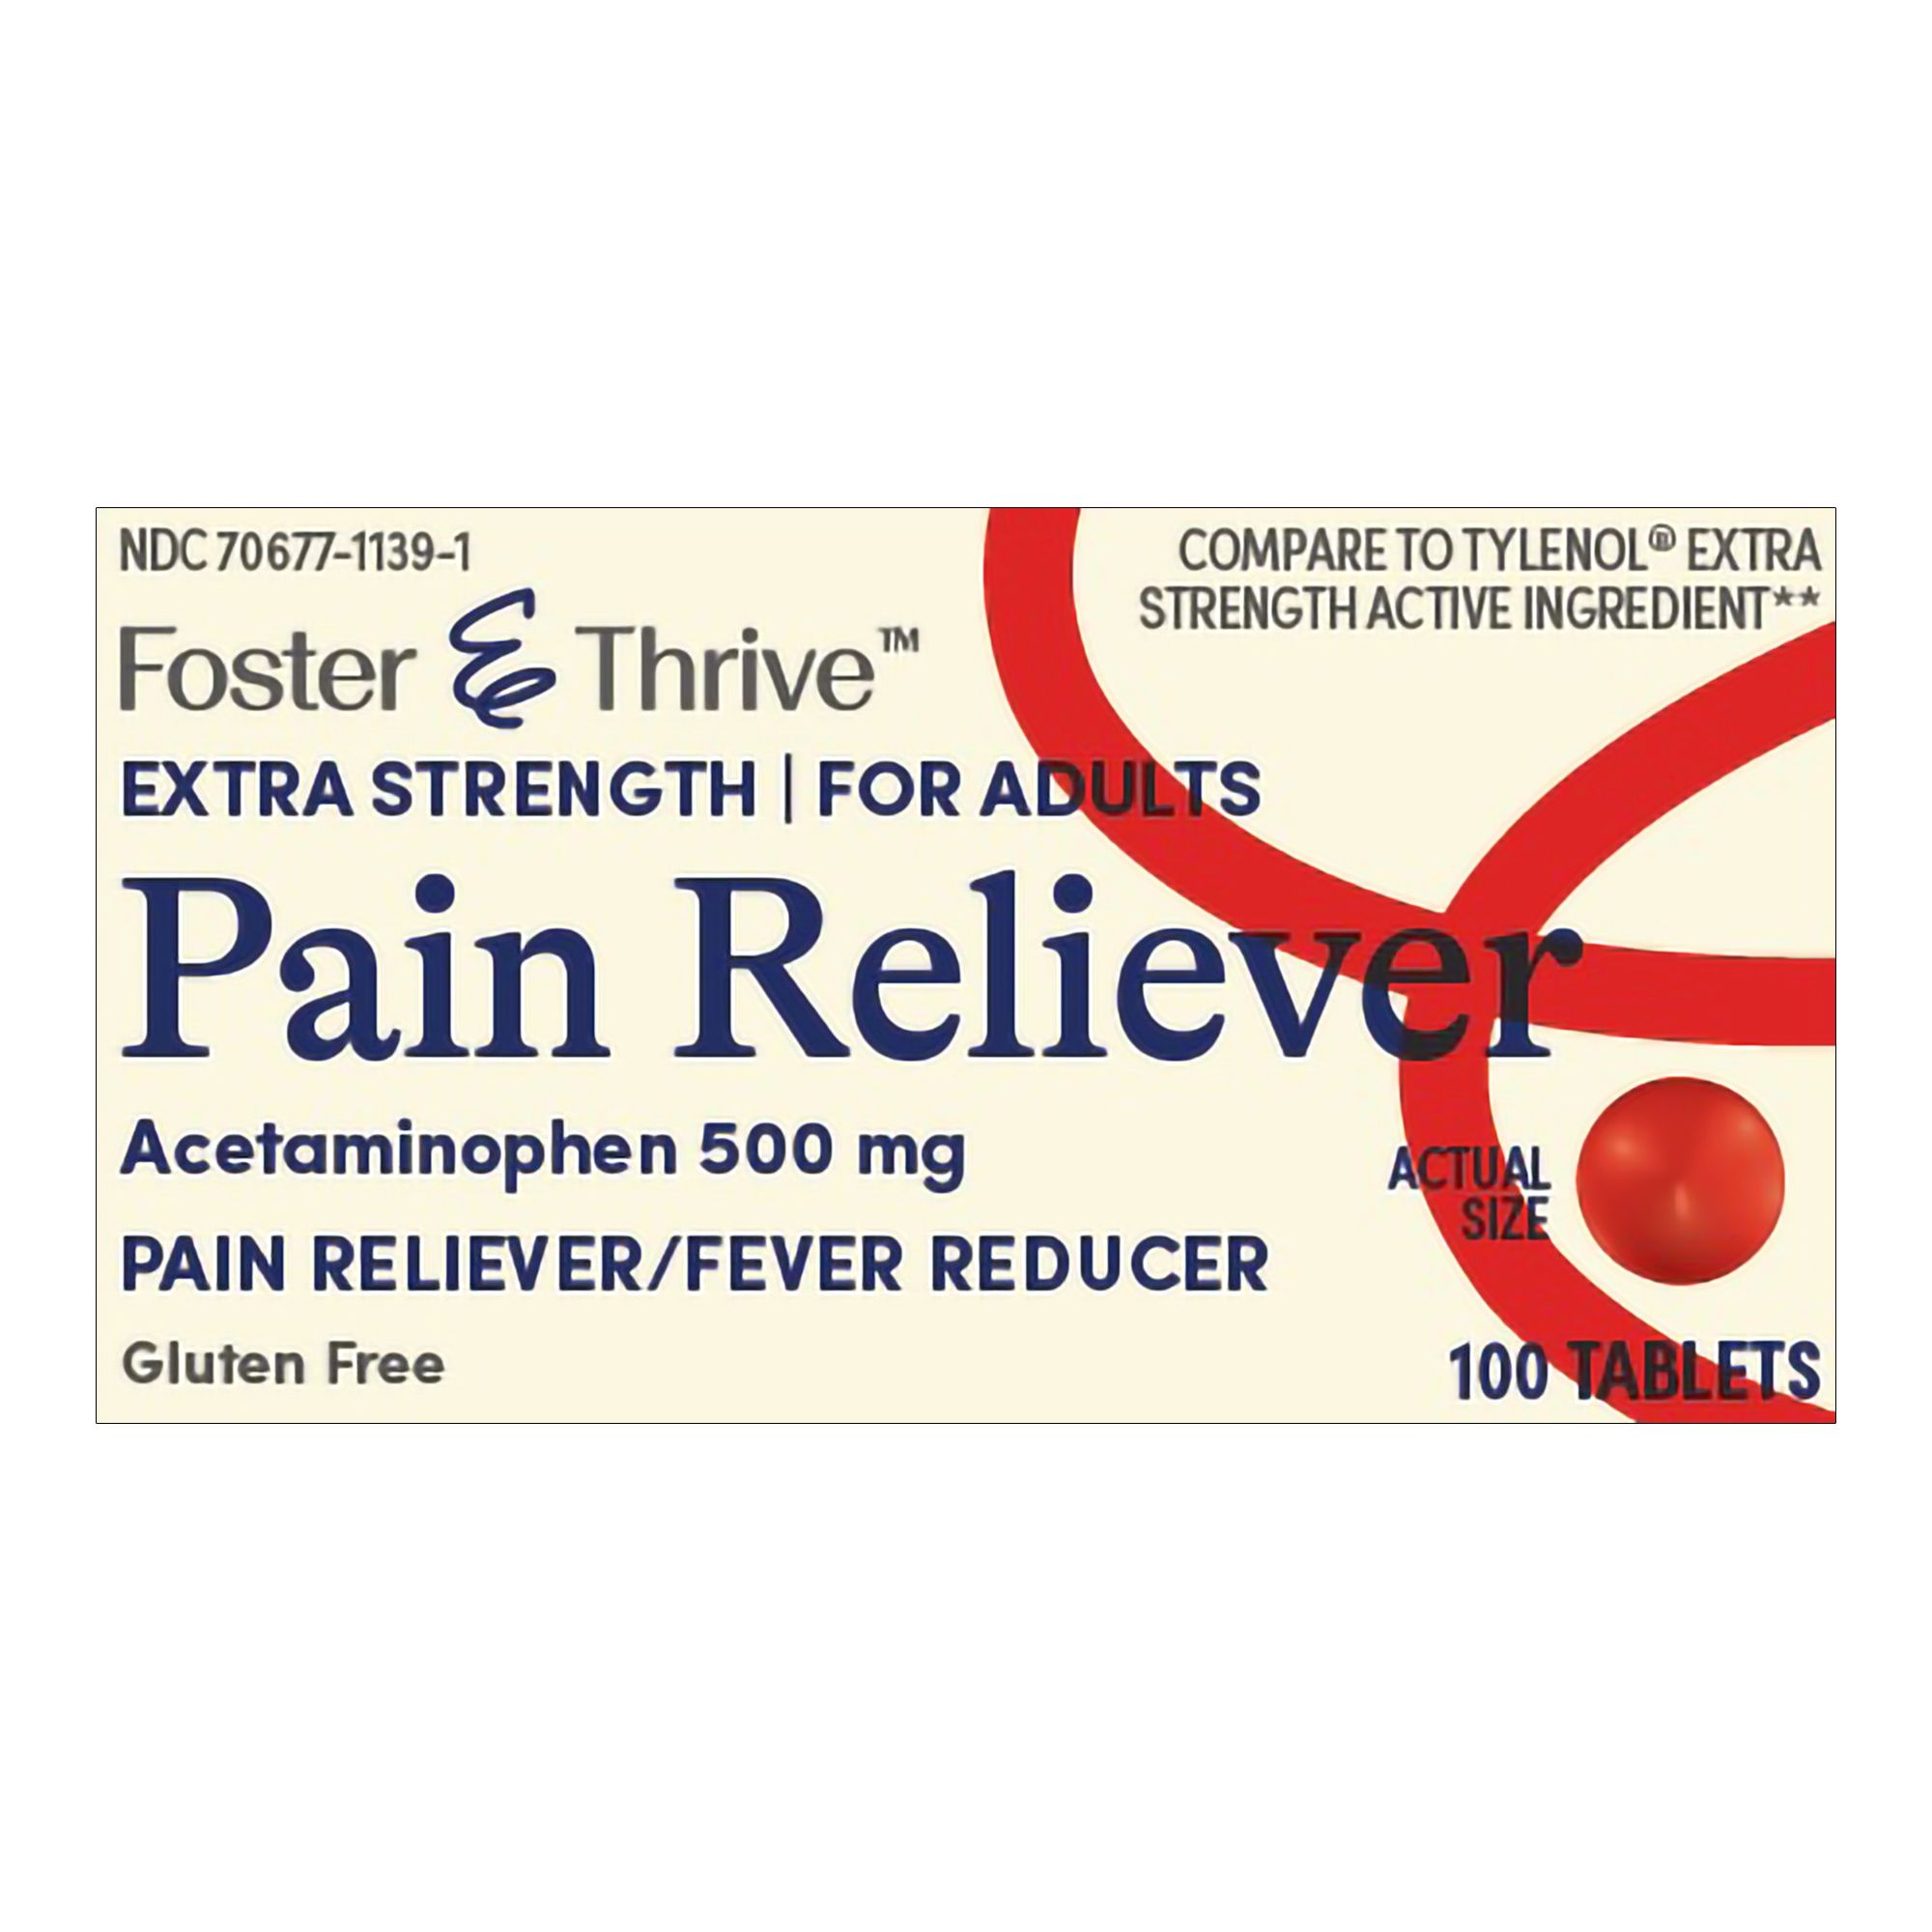 Foster & Thrive Extra Strength Pain Reliever Acetaminophen Tablets, 500 mg - 100 ct